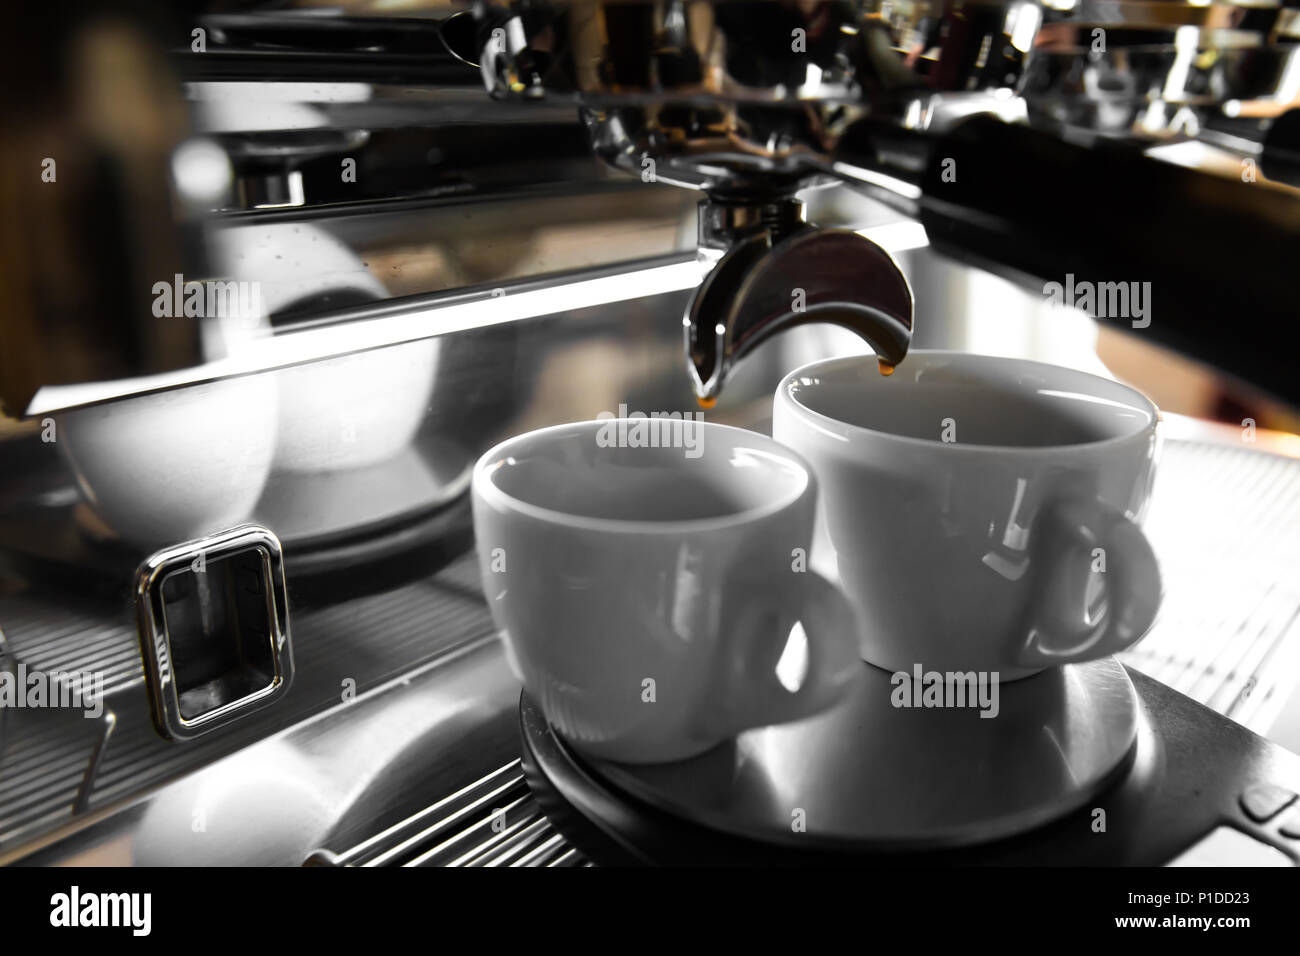 Italian espresso machine on a counter in a restaurant dispensing freshly brewed coffee into two small cups Stock Photo